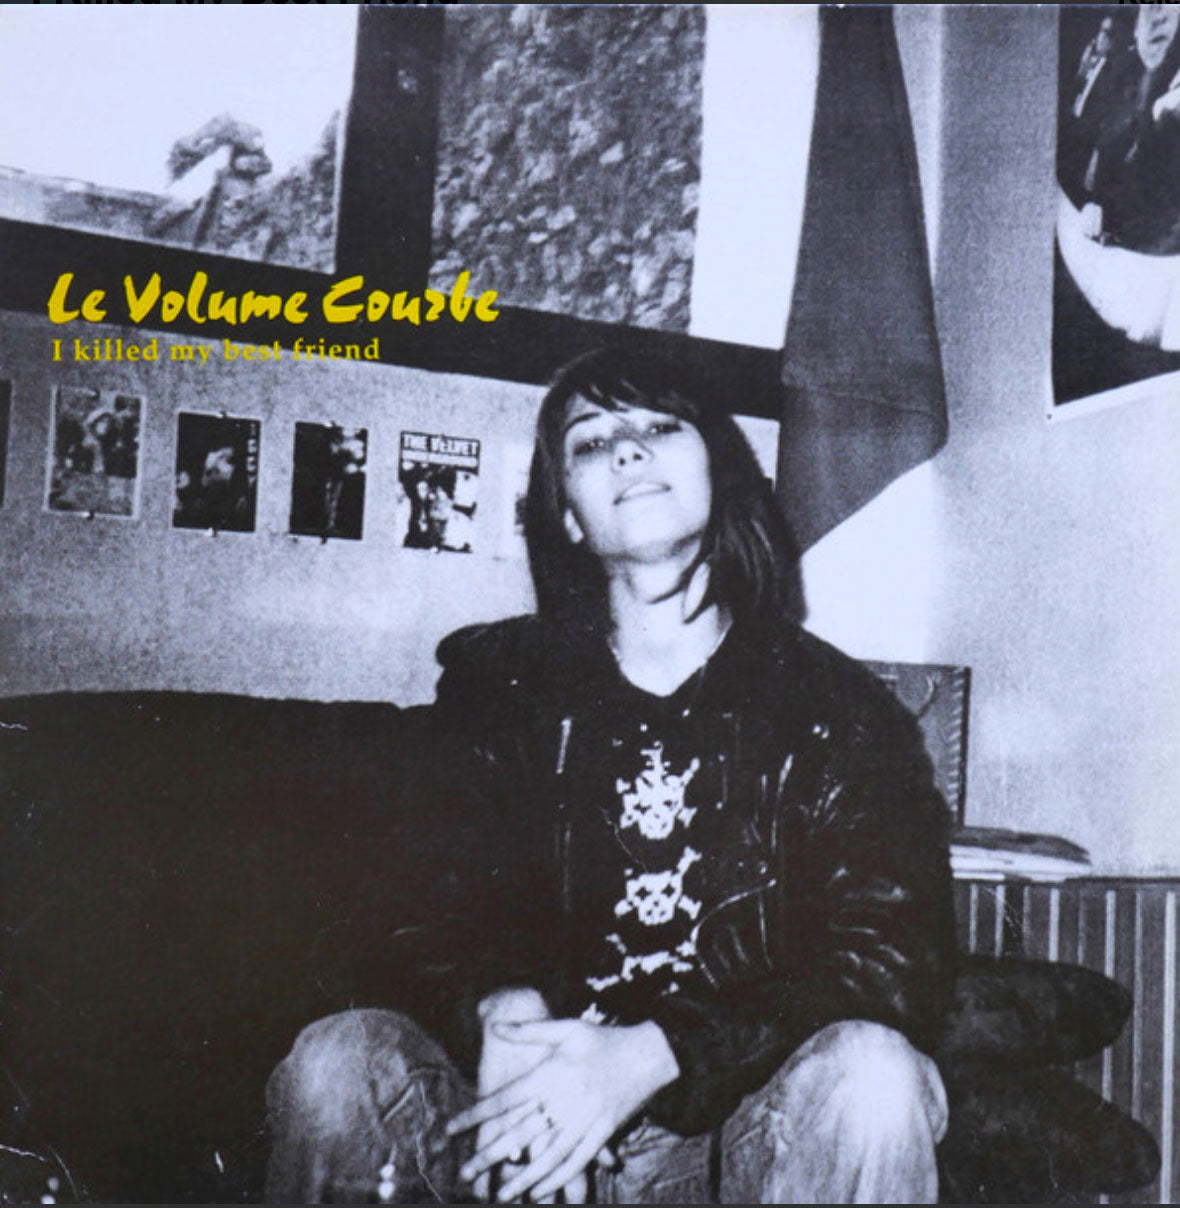 Le Volume Courbe - I Killed My Best Friend - UK Pressing - Rare